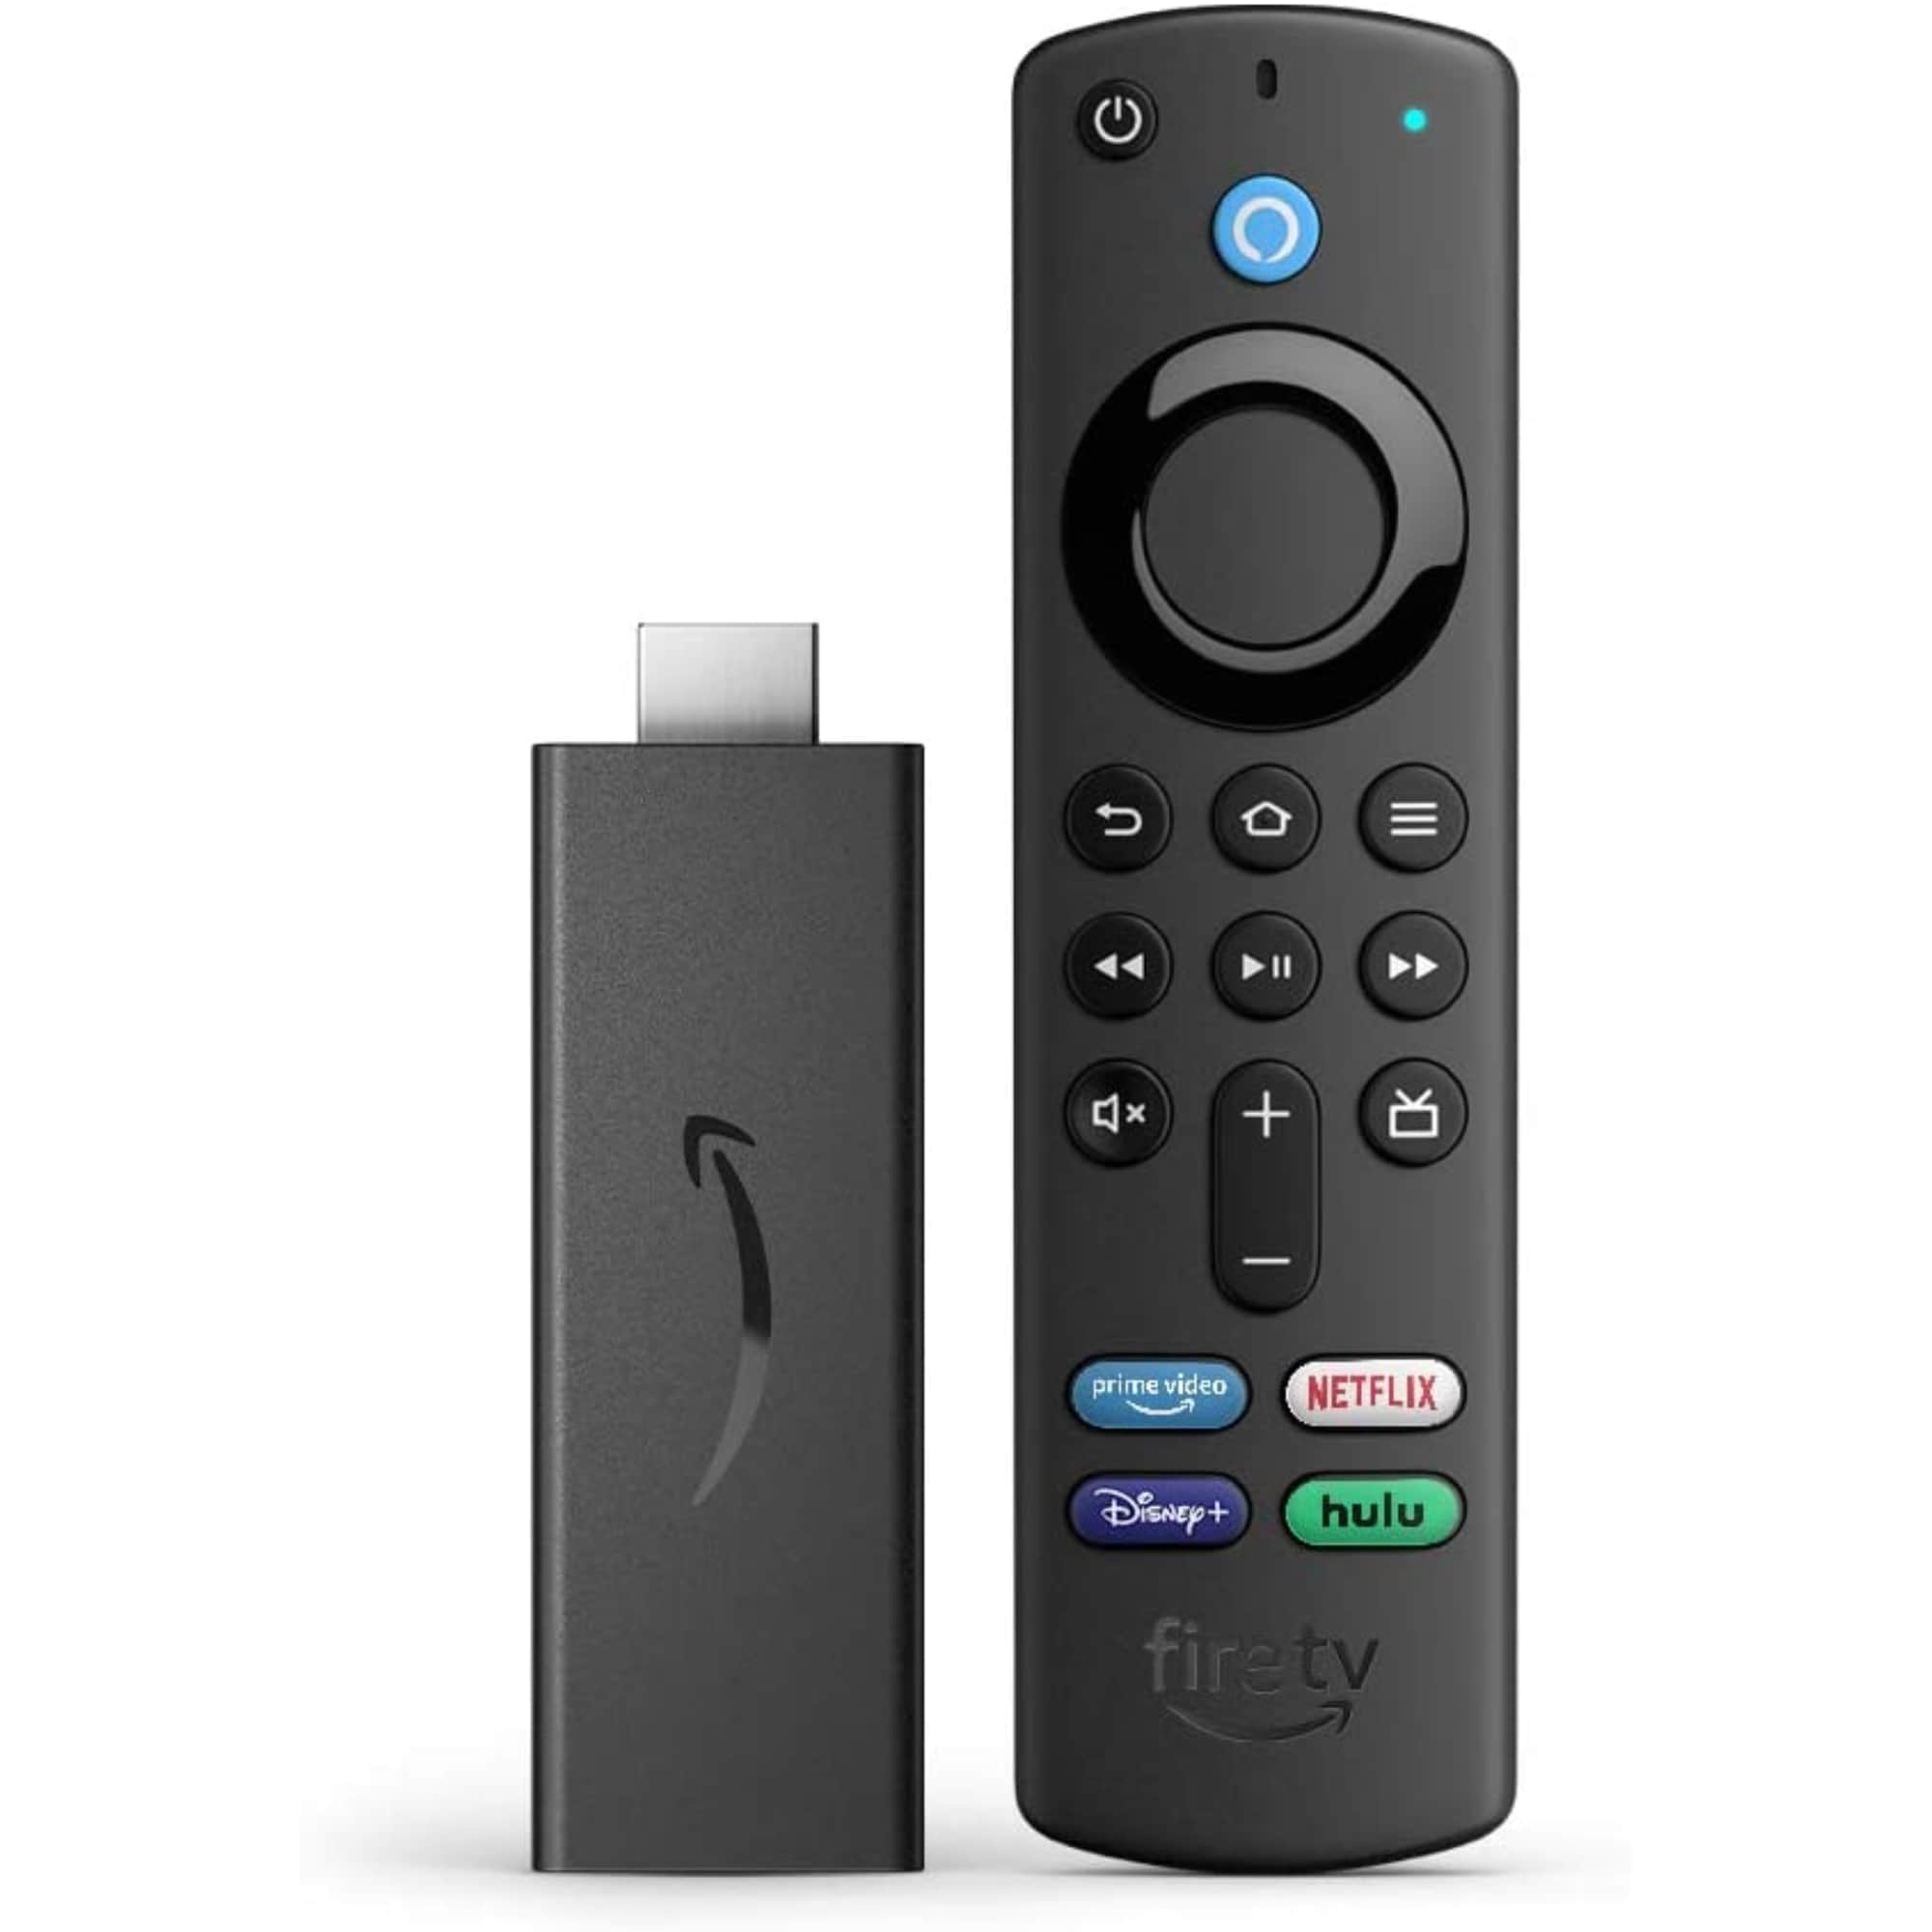 Amazon Fire TV Stick (3rd Gen) with Alexa Voice Remote (includes